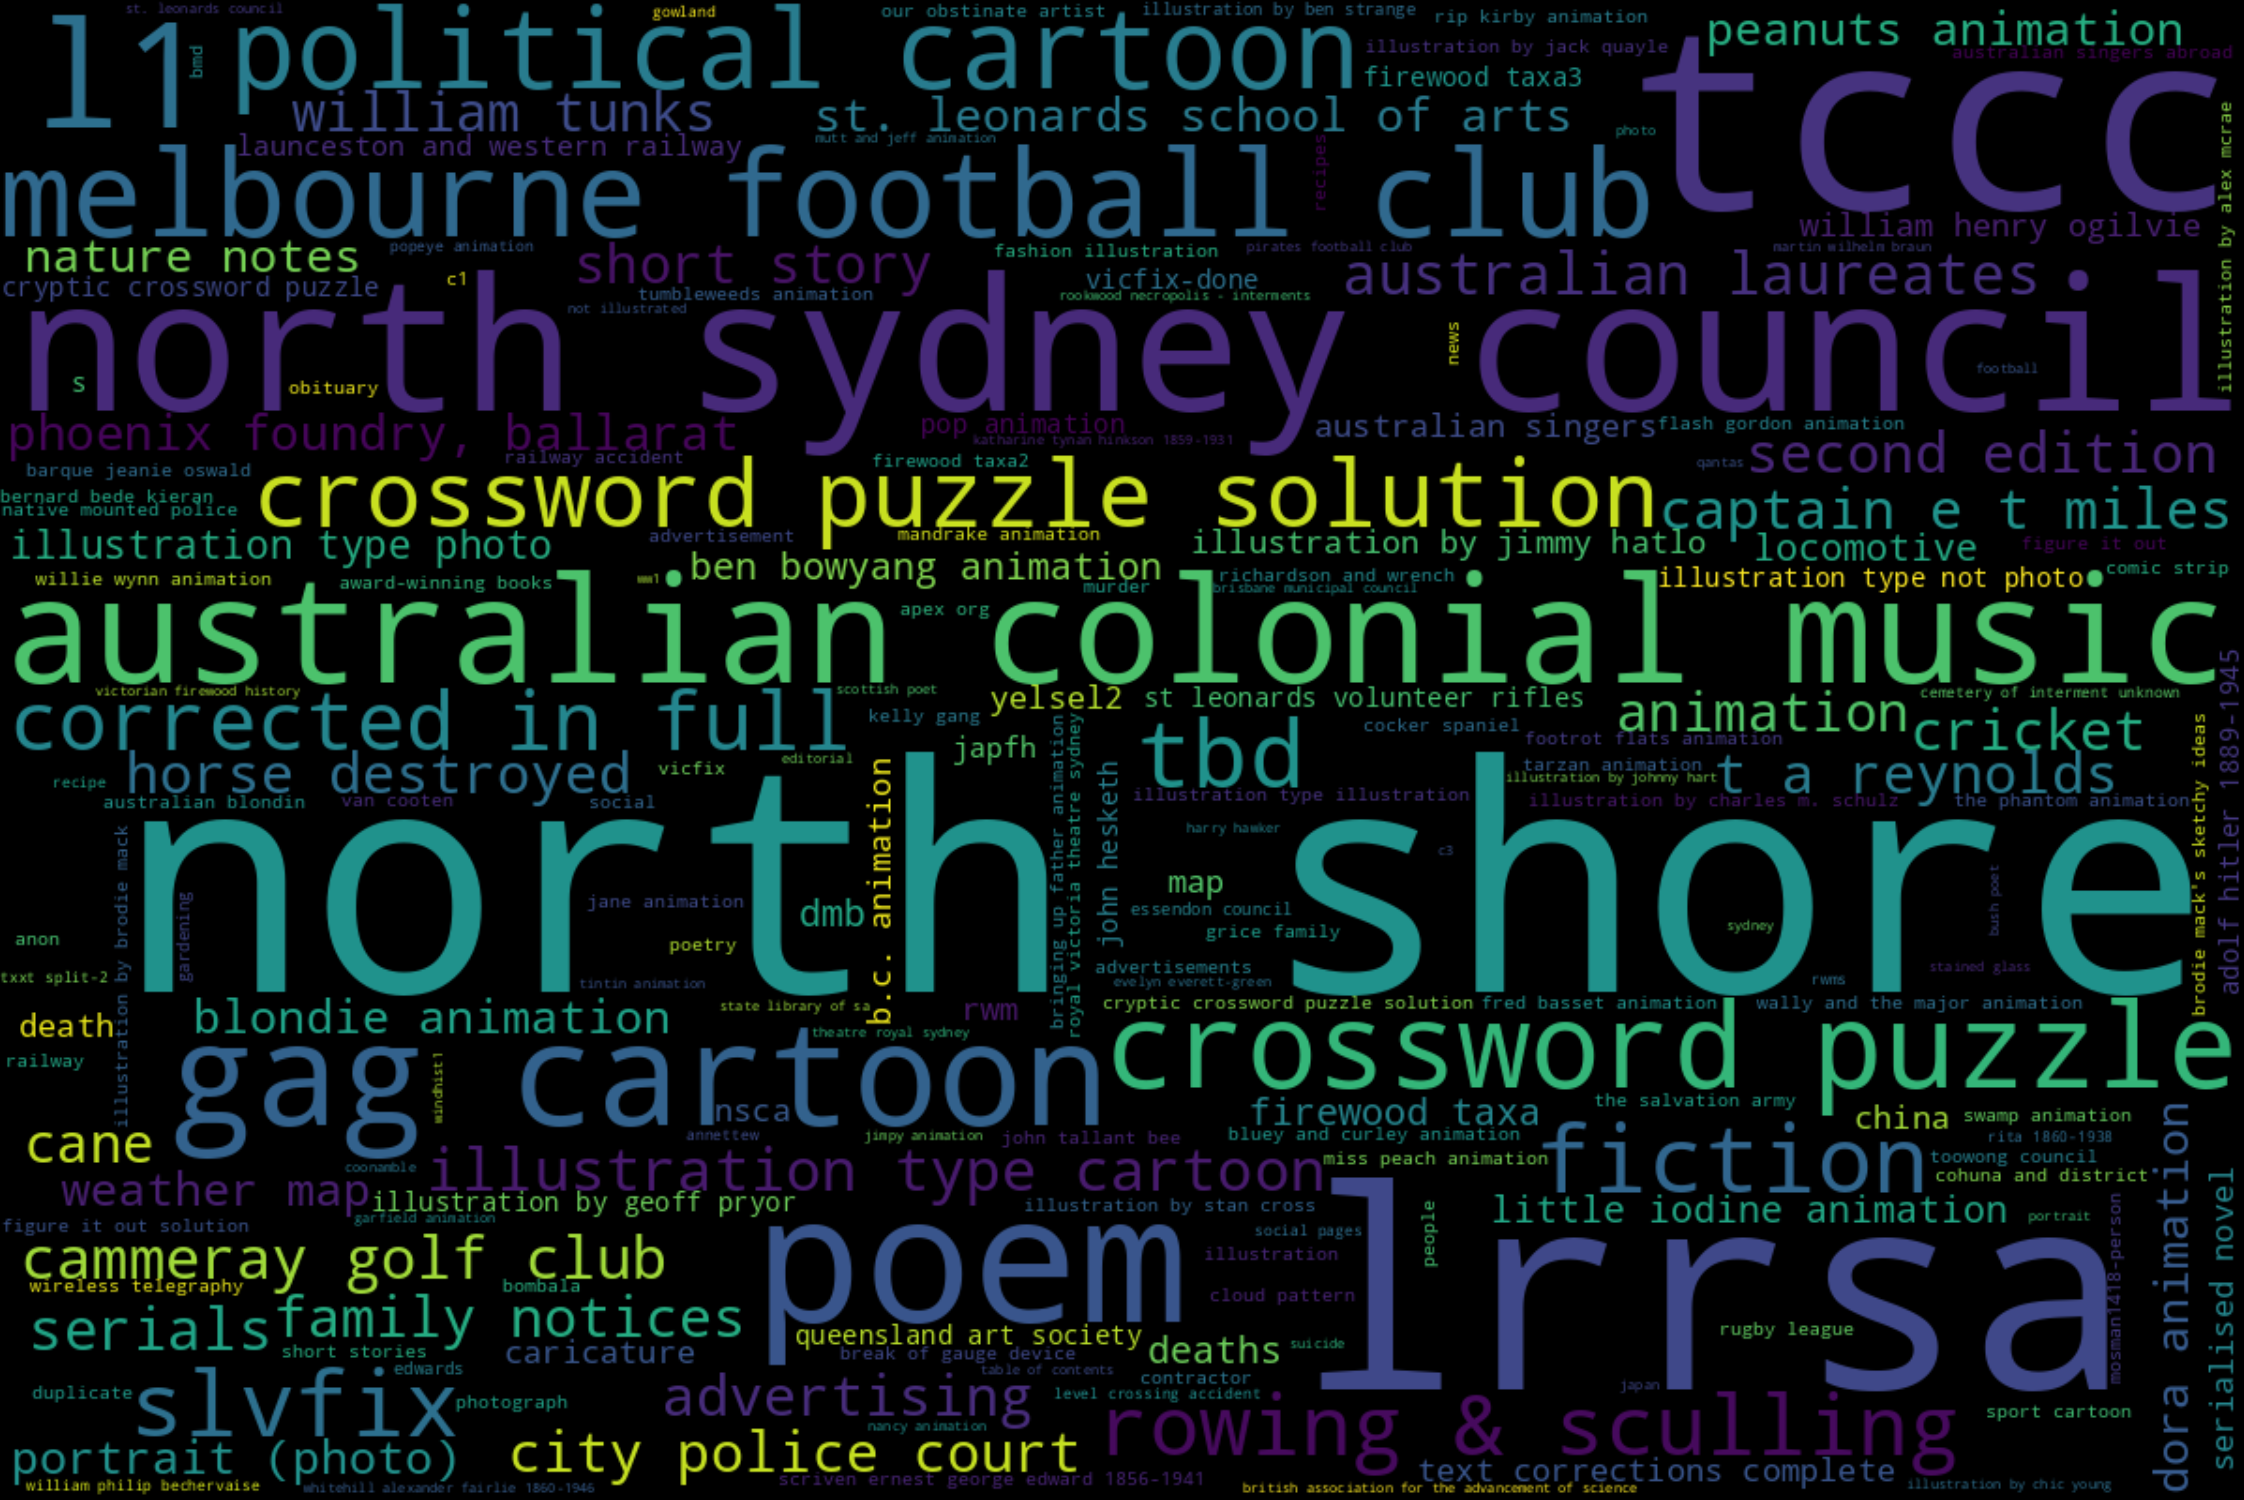 Tag cloud showing the frequency of the two hundred most commonly-used tags in Trove.